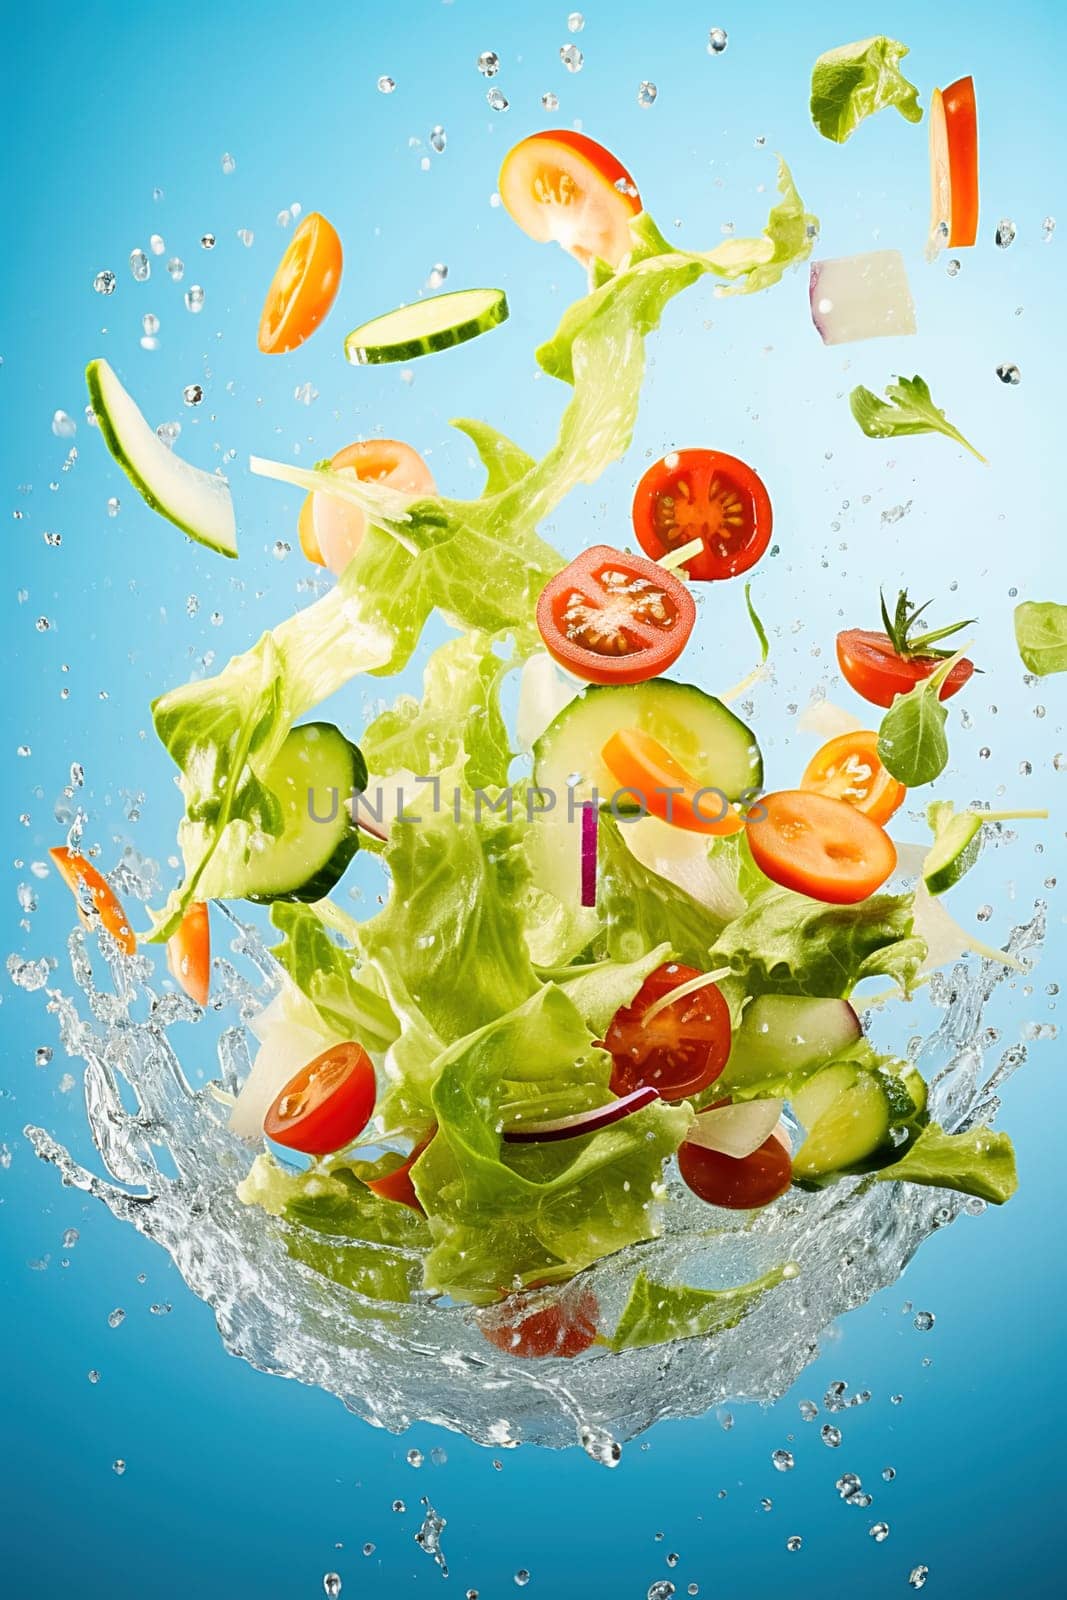 Sliced vegetable salad with water splashes in the air. Levitation. by Yurich32